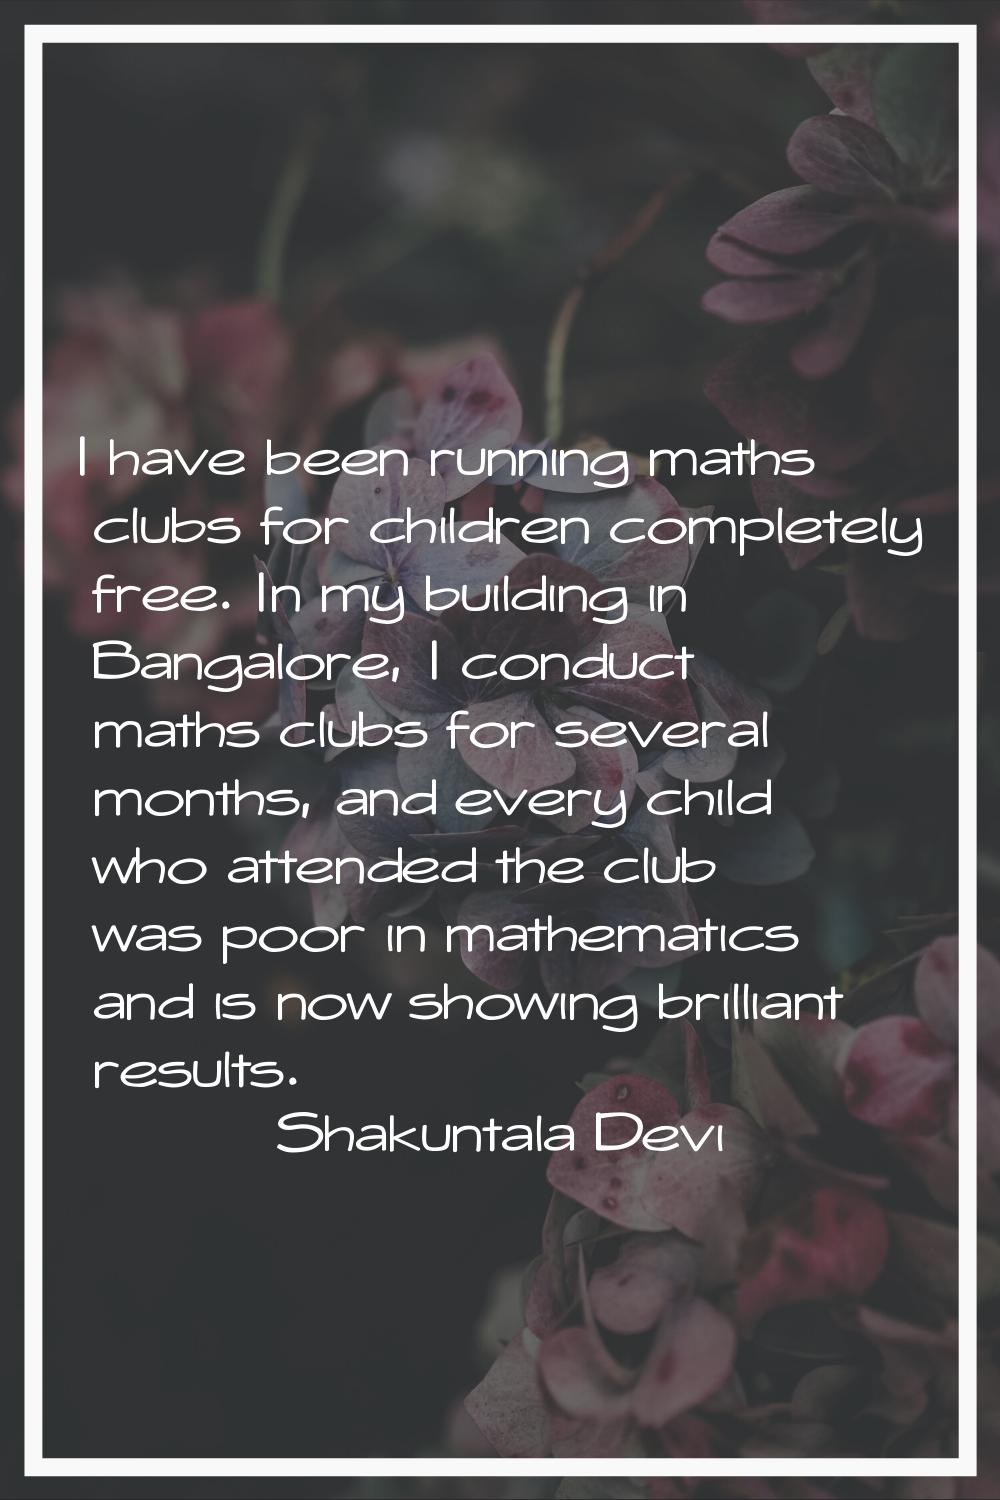 I have been running maths clubs for children completely free. In my building in Bangalore, I conduc